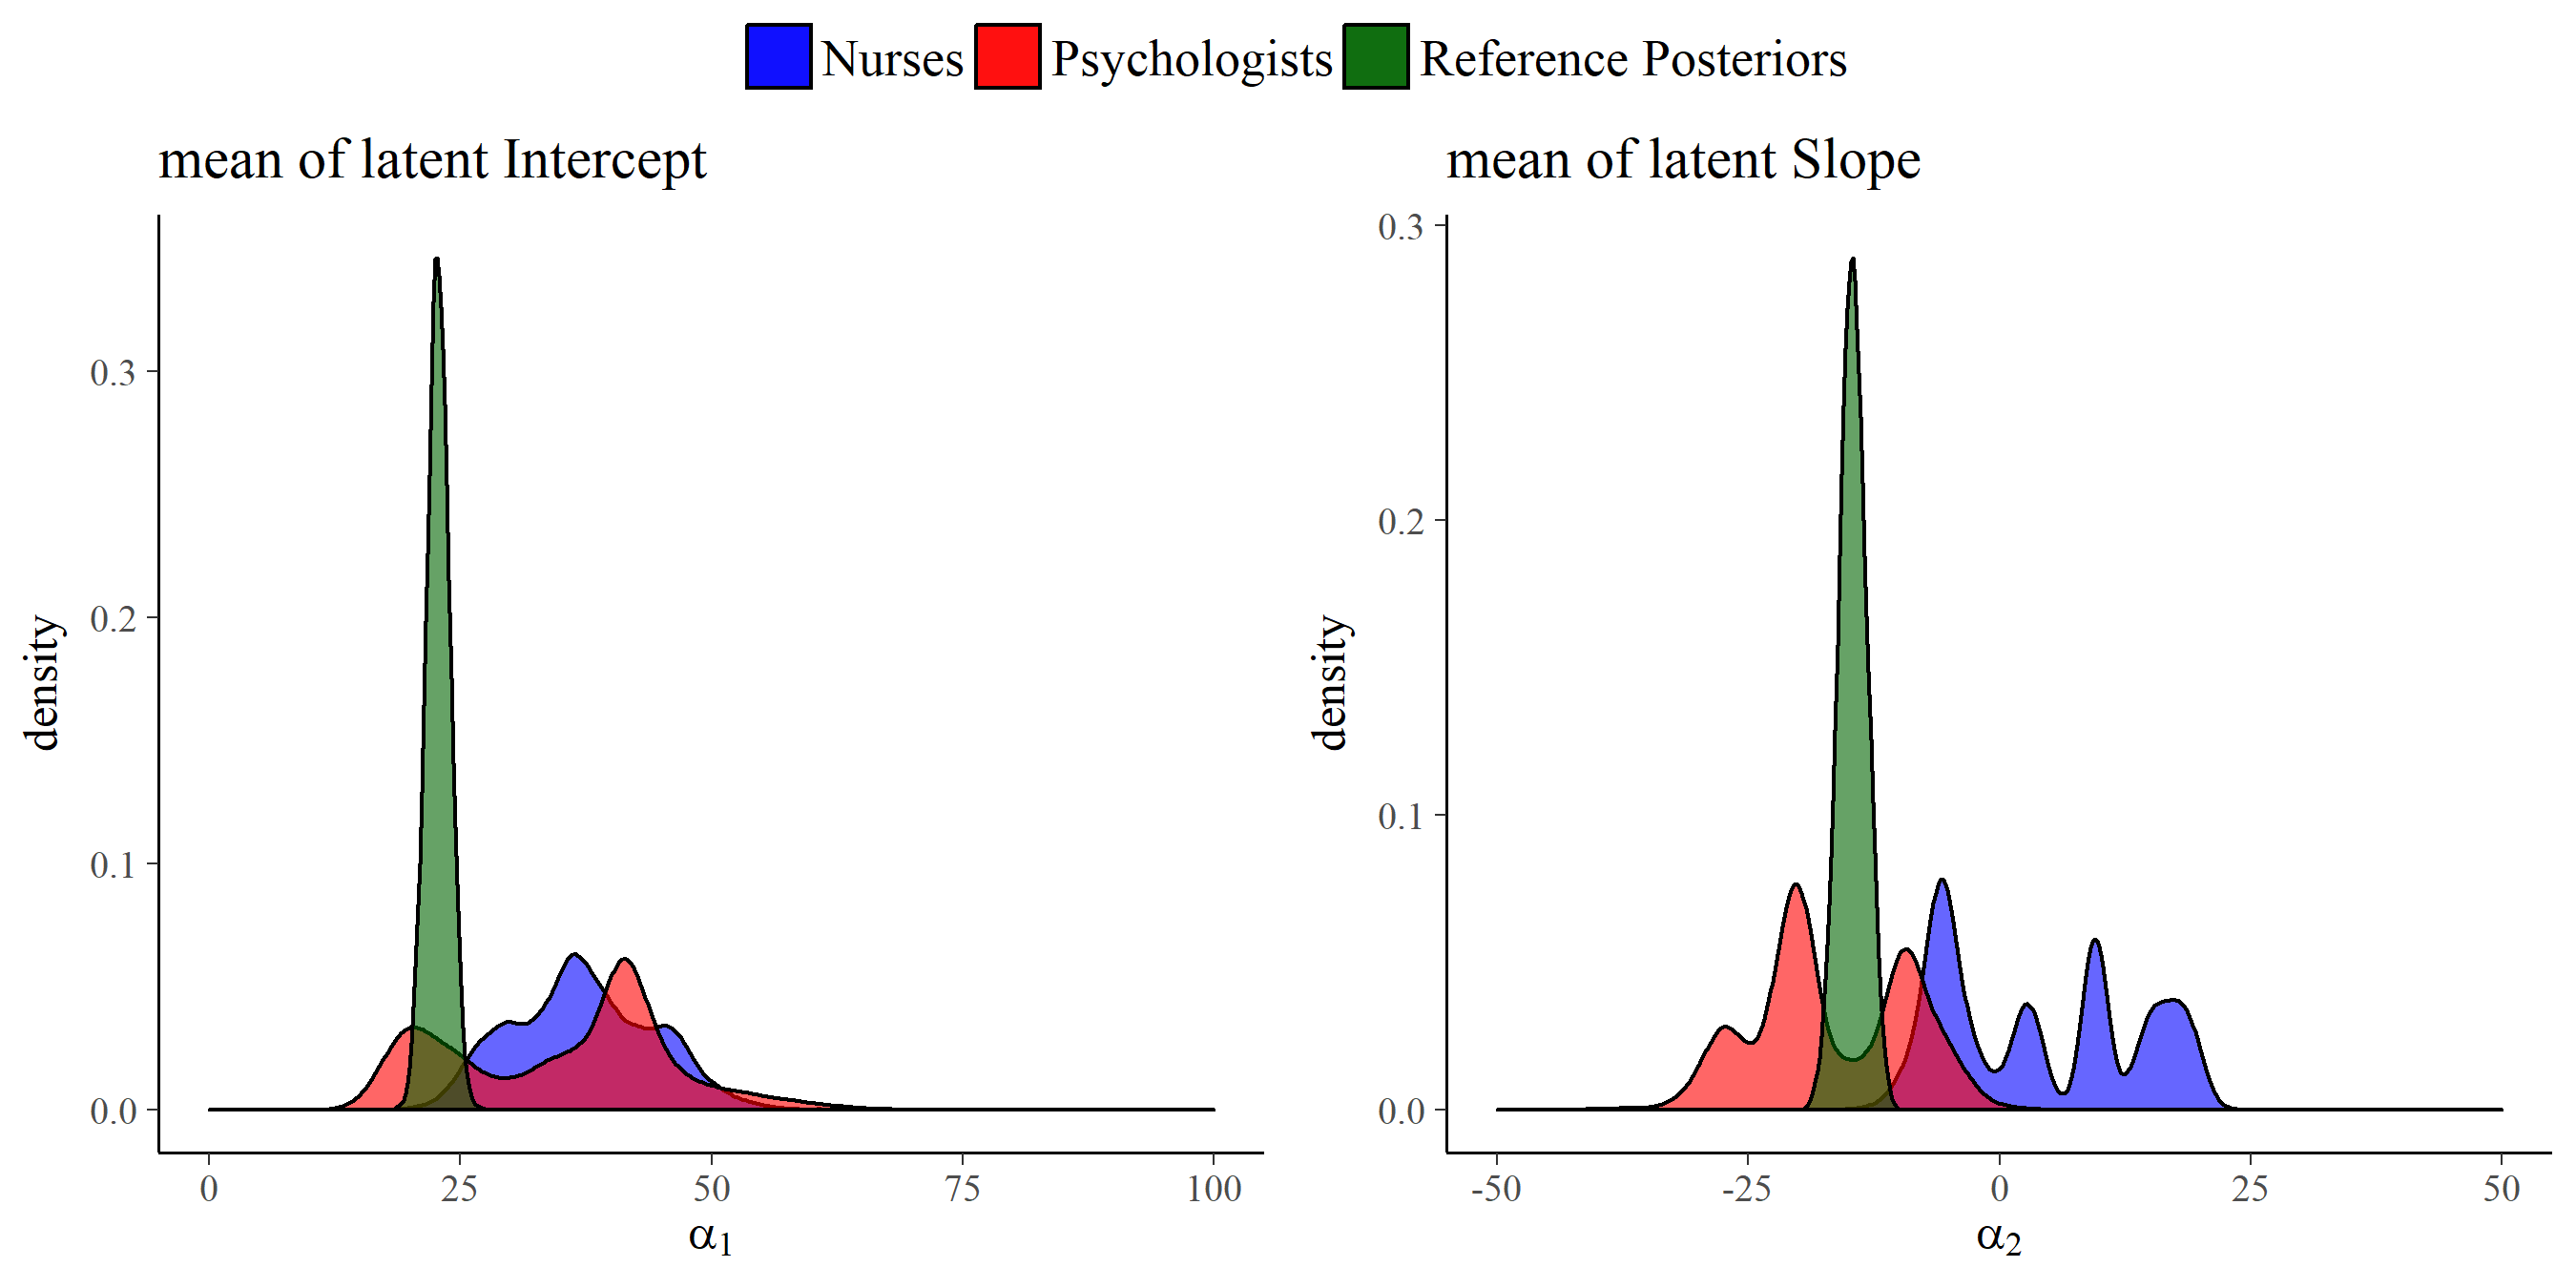 Visual representation of the reference posterior distributions for the group mean of latent intercept and slope with the group expert priors for the parameters. The reference posteriors are approximately distributed \(\alpha_1 \sim N(22.7, 1.3)\), and \(\alpha_2 \sim N(-14.6, 1.9)\).